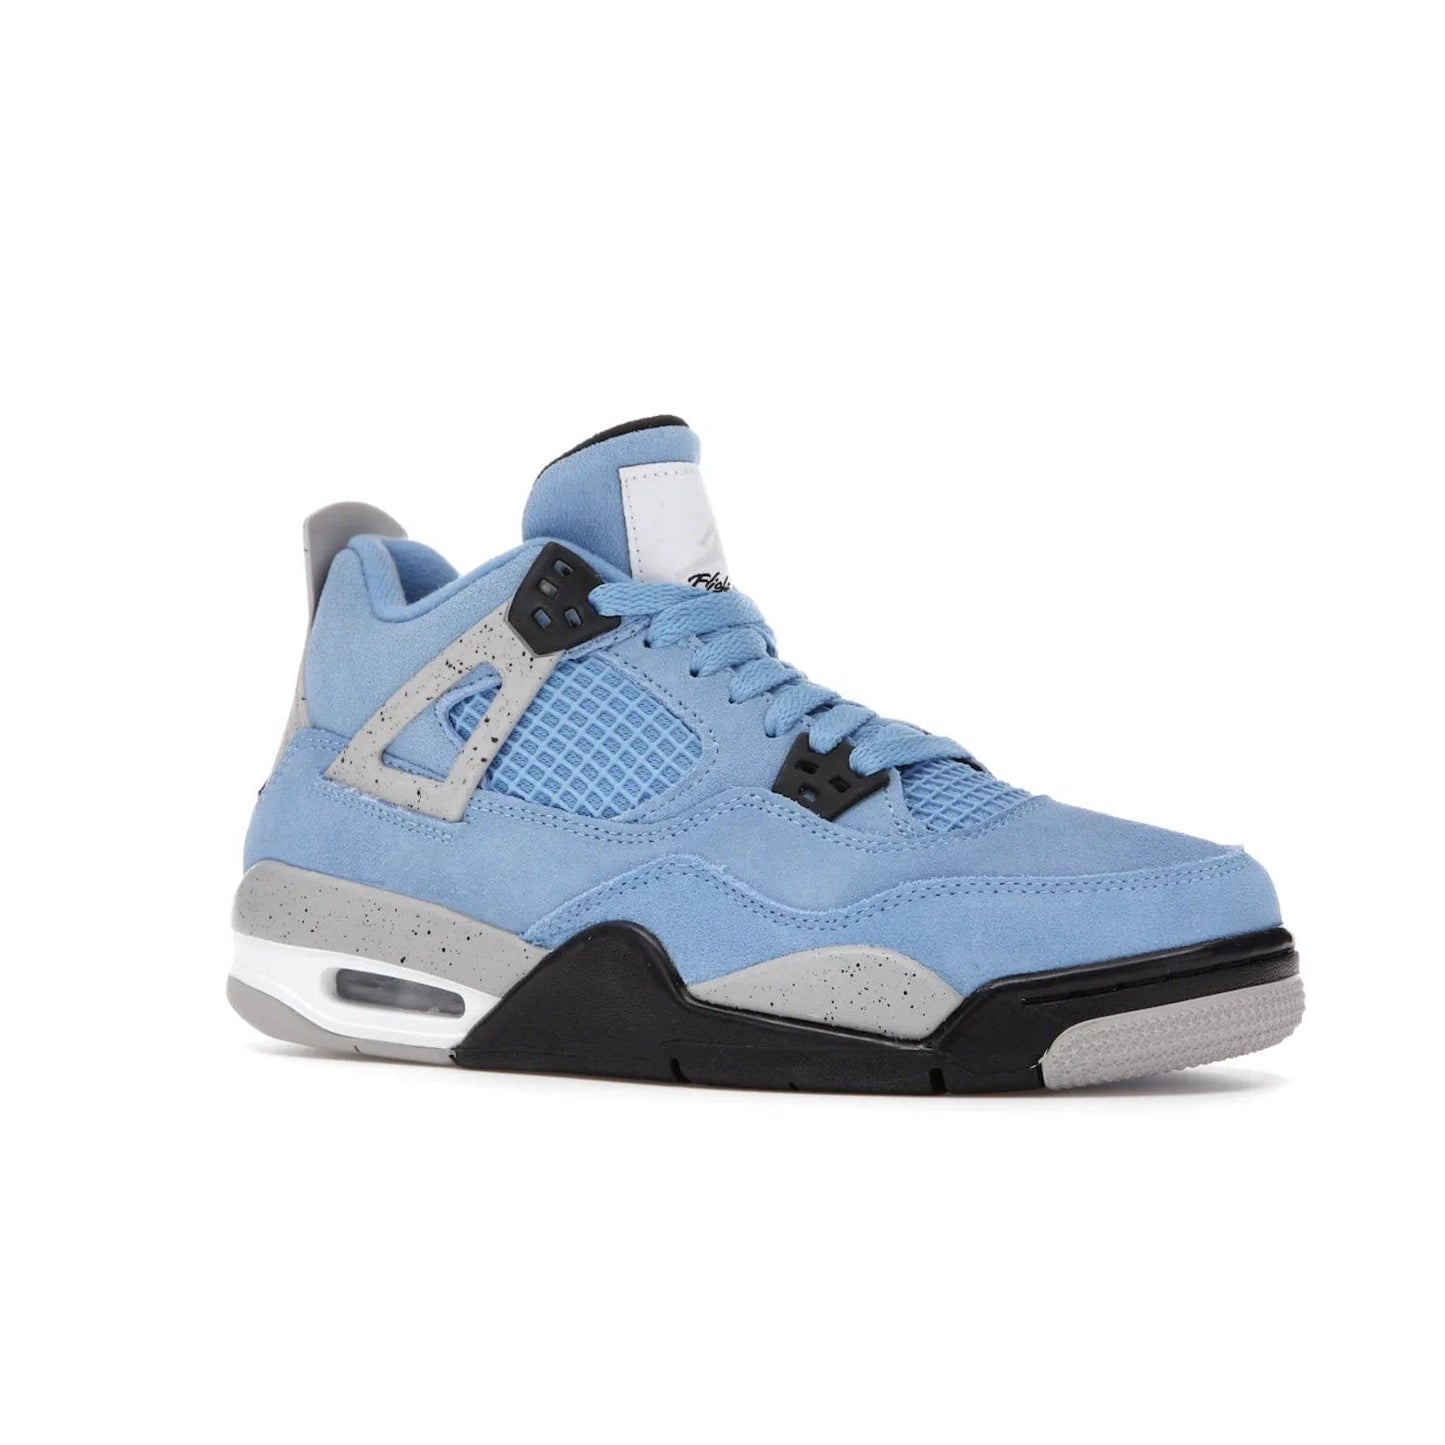 Jordan 4 Retro University Blue (GS) - Image 4 - Only at www.BallersClubKickz.com - Air Jordan 4 Retro University Blue GS: Classic silhouette and vibrant colors. Featuring a suede upper and Jumpman icon, this grade school-size shoe is perfect for collections and retails at $150.